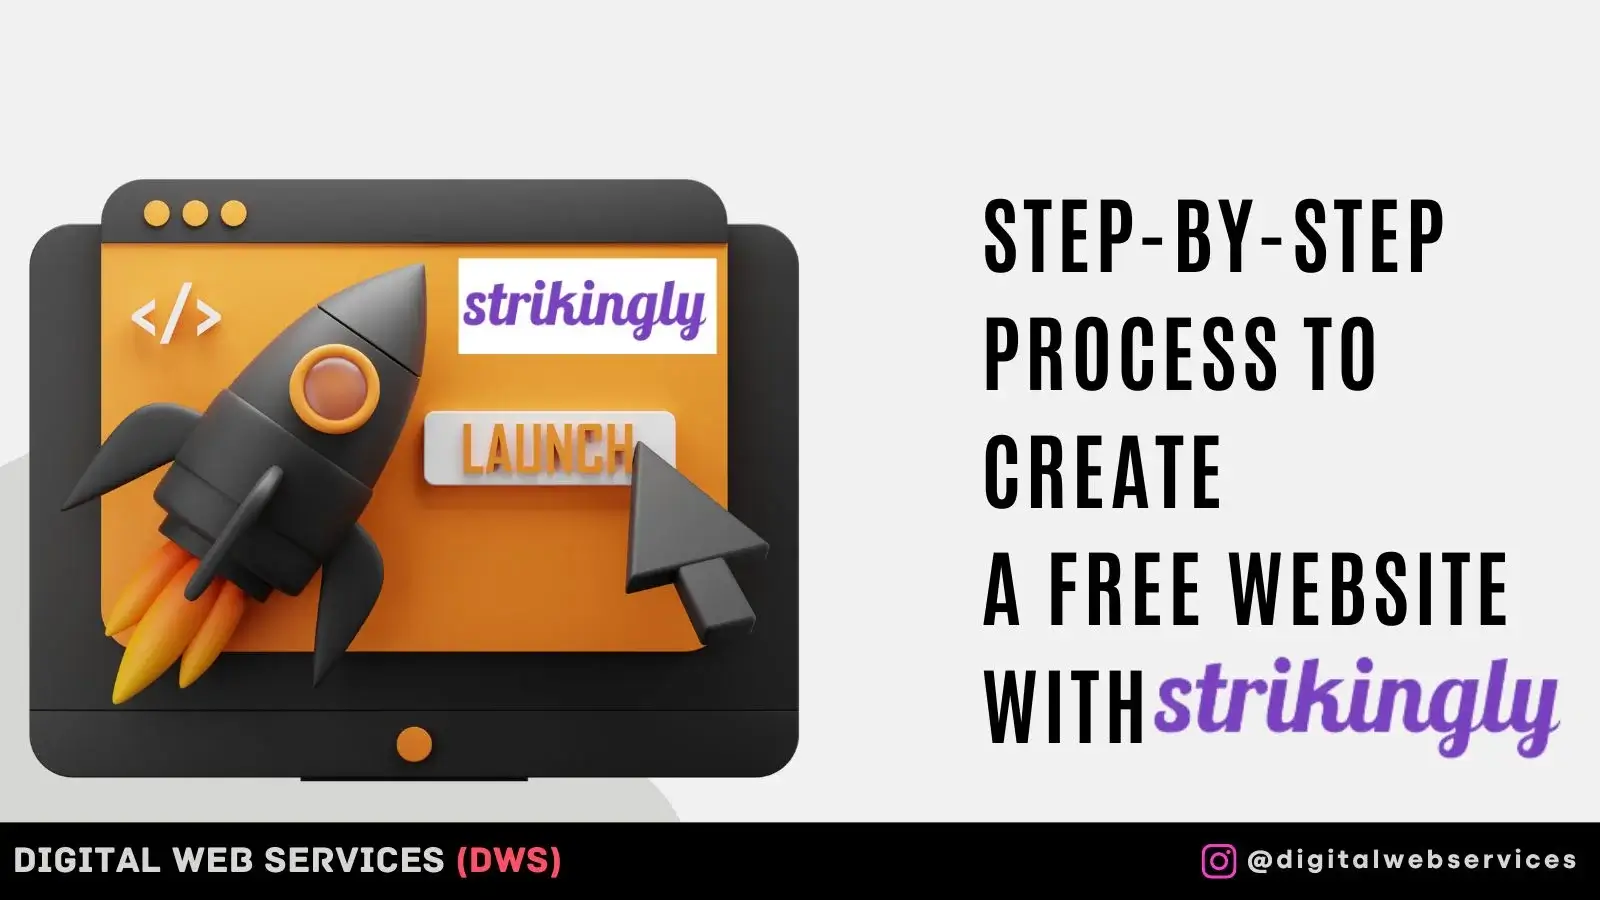 Step-by-Step Process to Create a Free Website with Strikingly